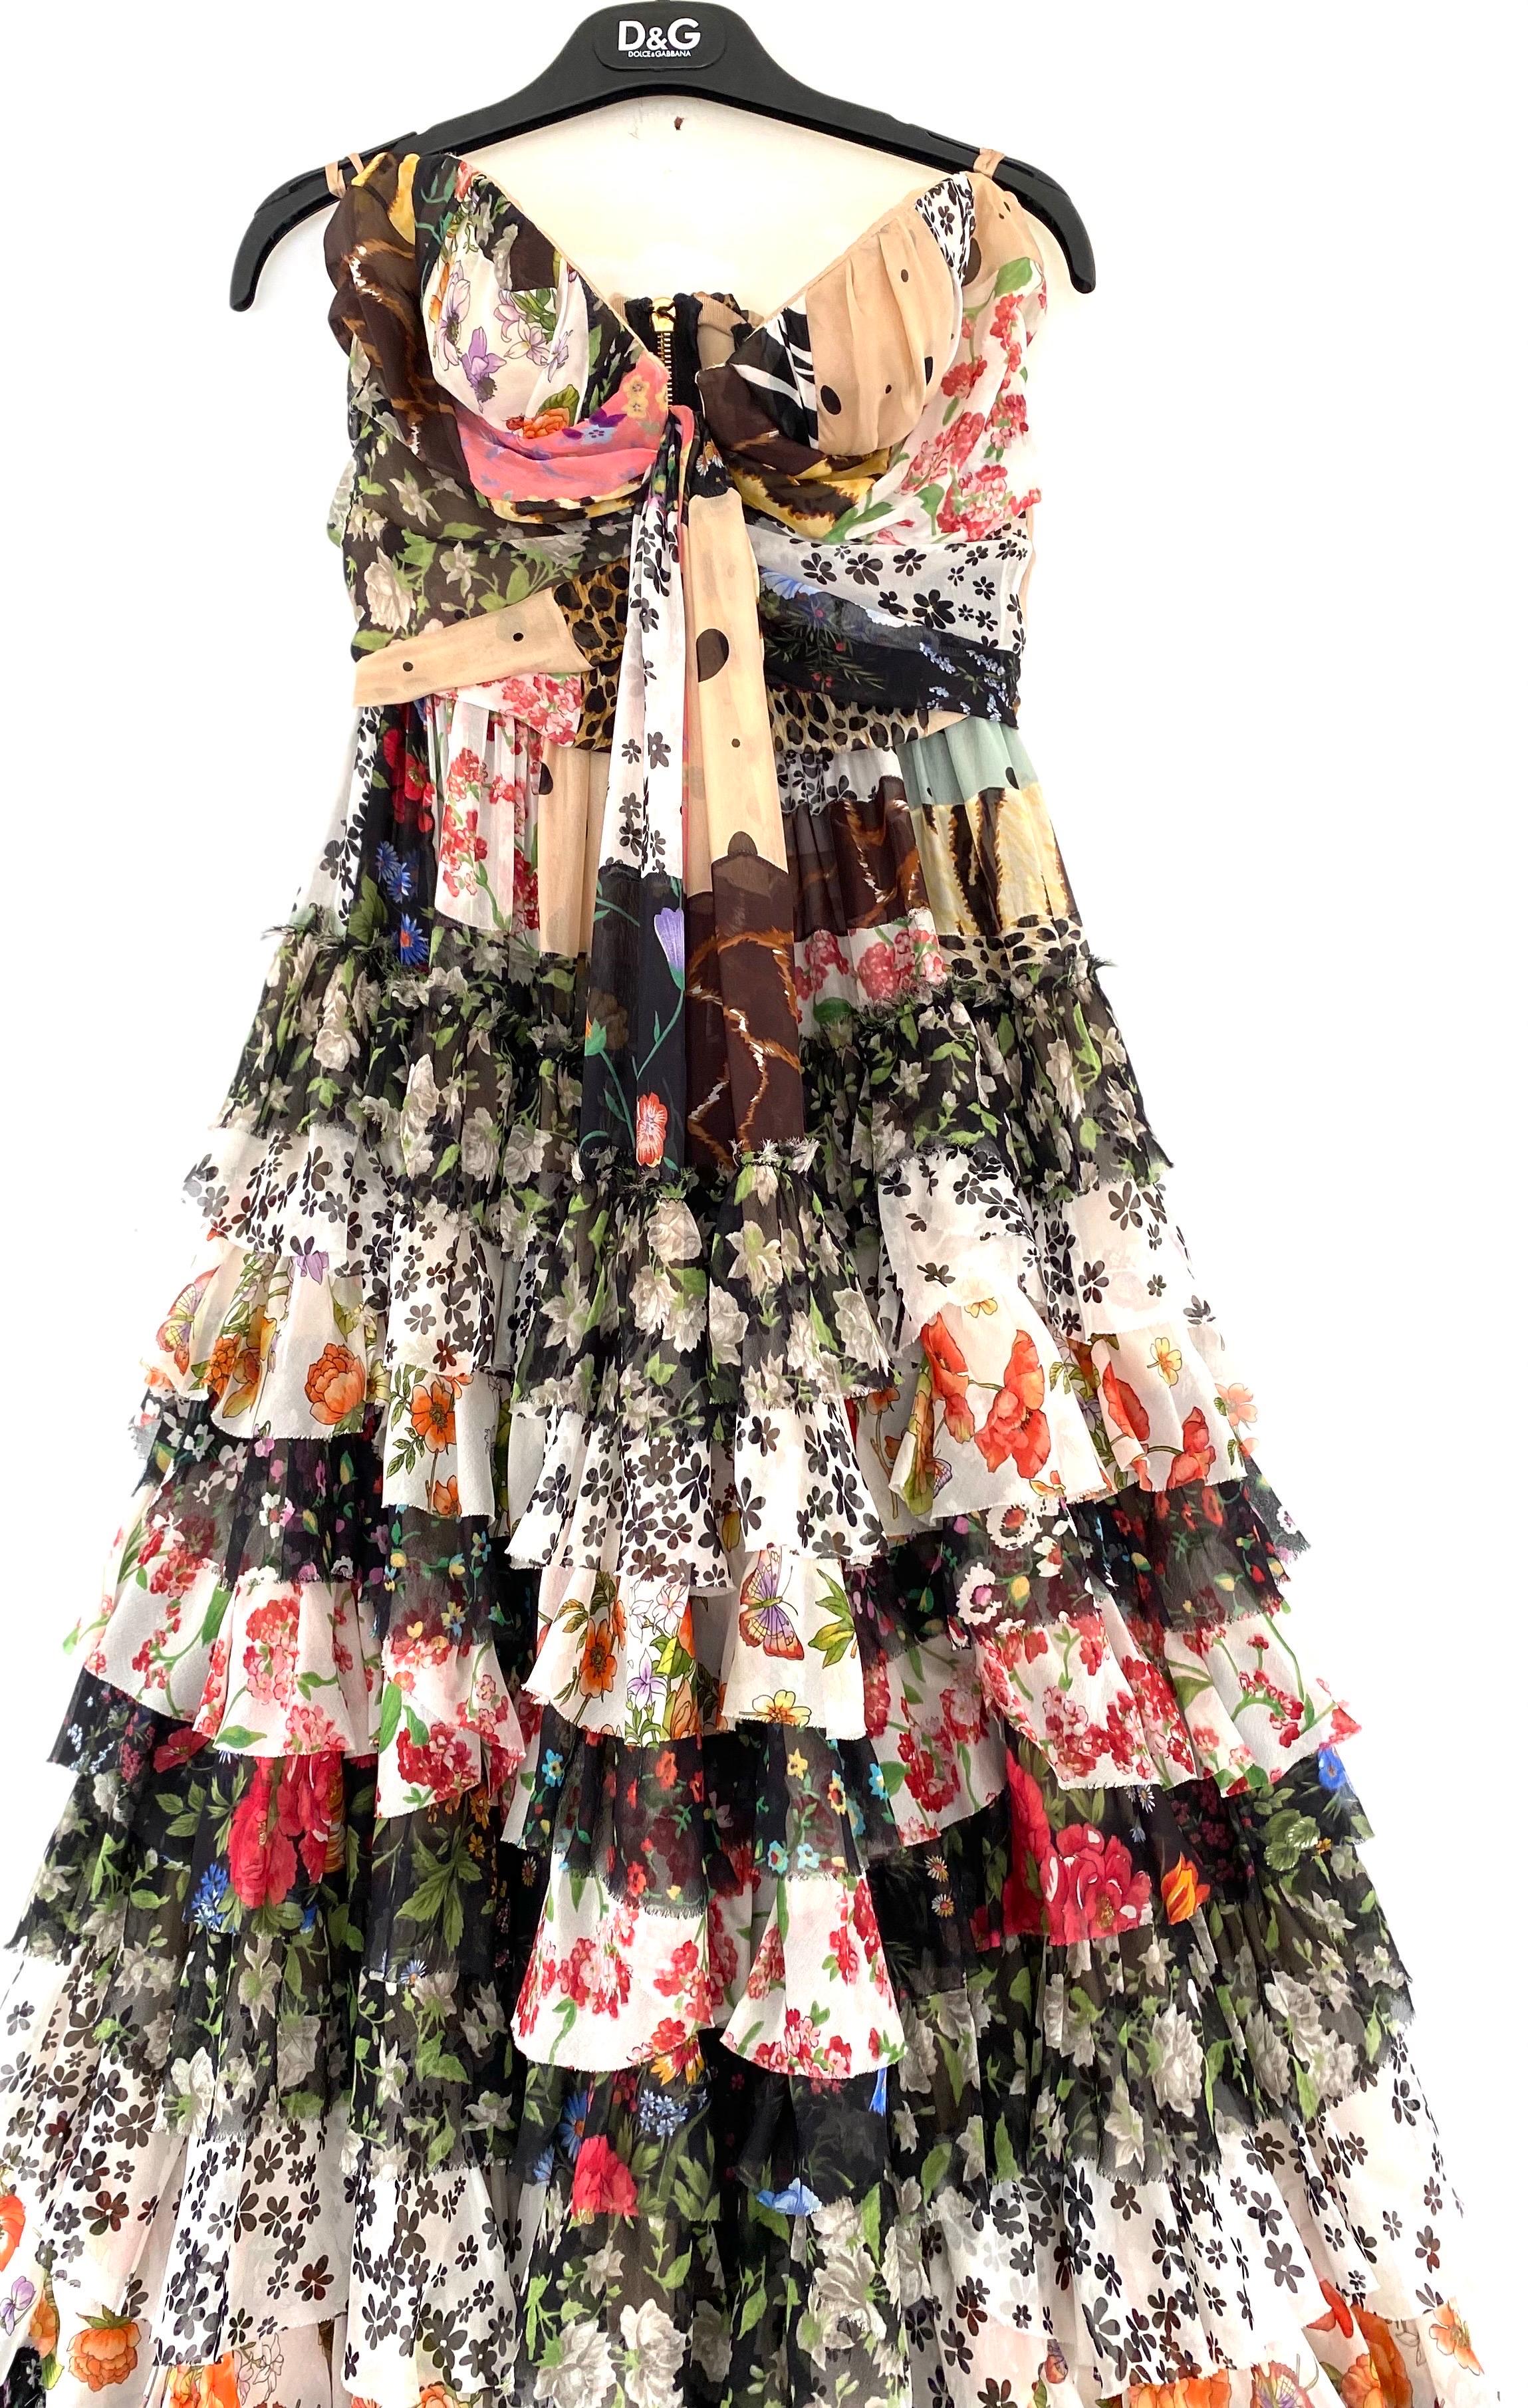 Incredible 1990s D and G by Dolce and Gabbana maxi dress from the spring 2008 RTW runway
Corset gown has a tiered skirt with a massive sweep 
Layers of multi color chiffon are backed with pale taupe silk 
100% silk
Boned bodice and built in interior